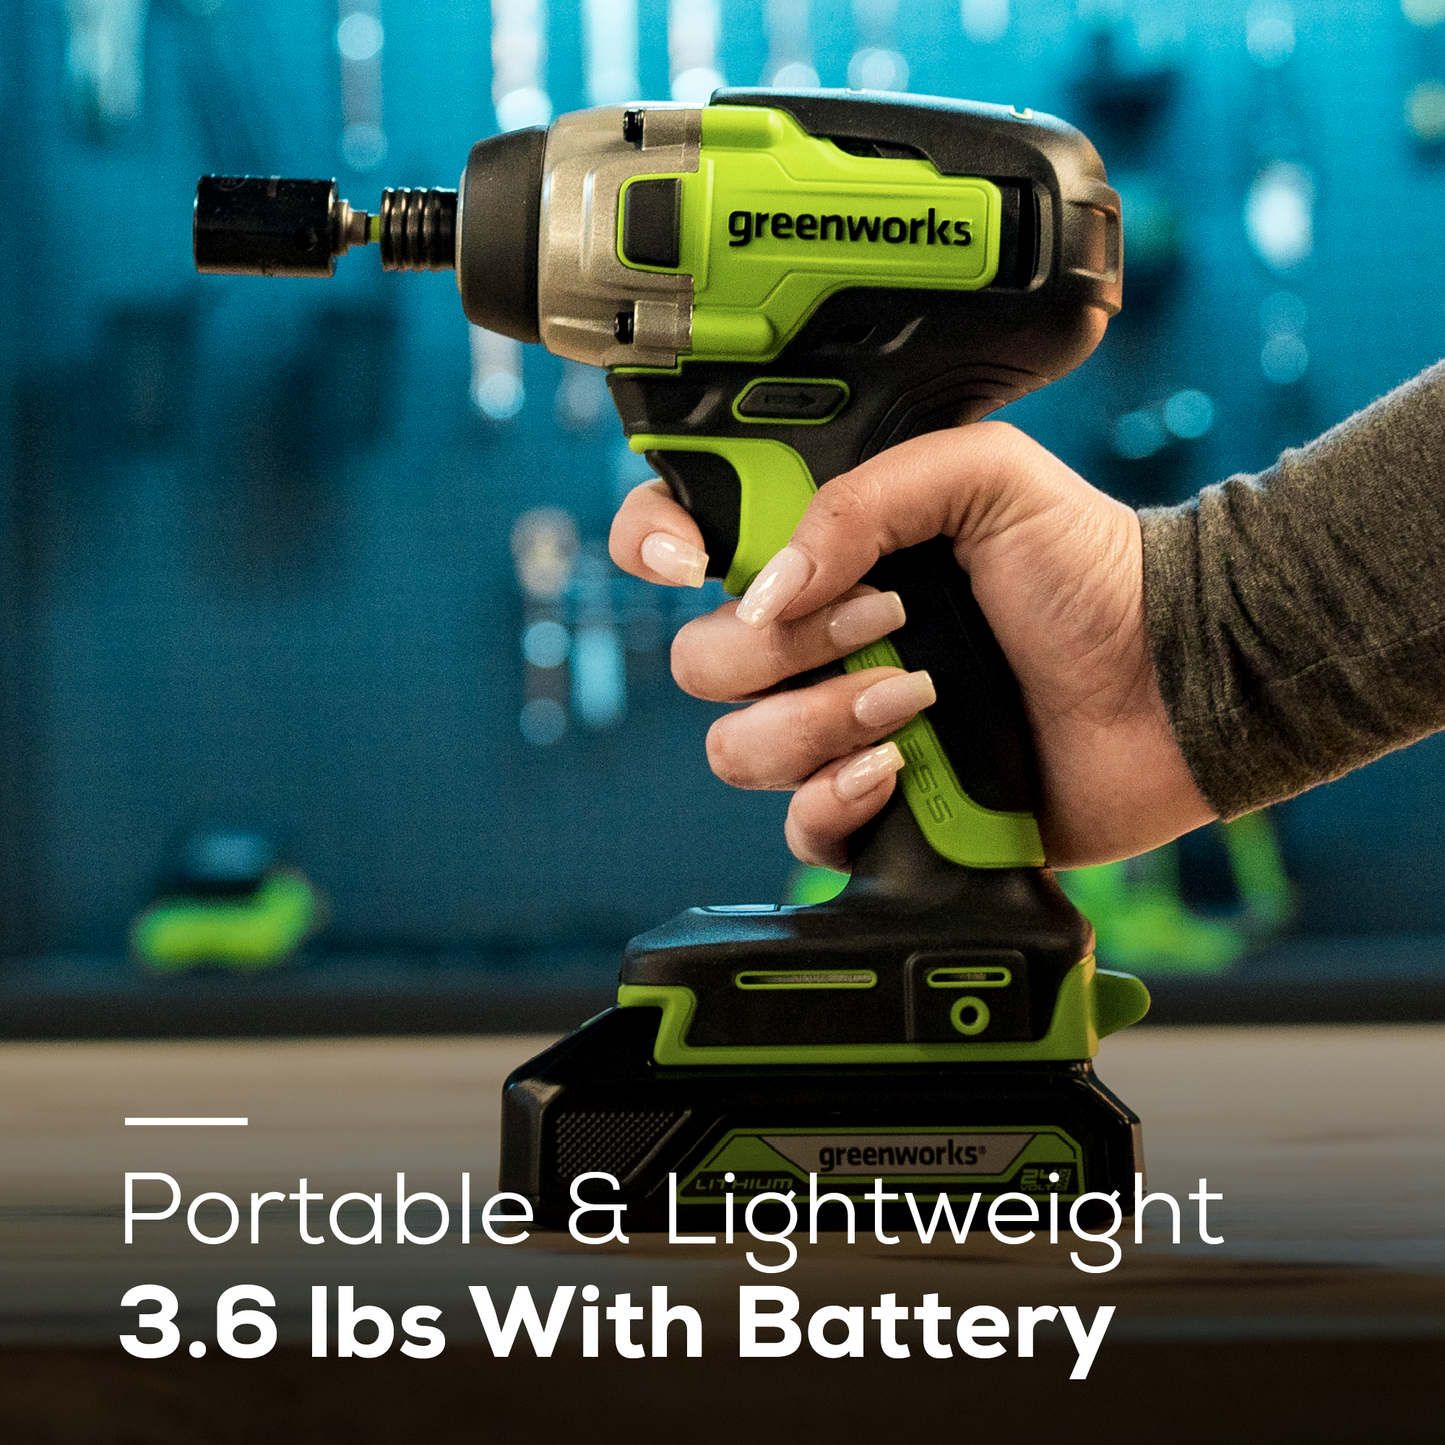 24V 1/4" 2650 in/lbs Brushless Impact Driver (Tool Only)